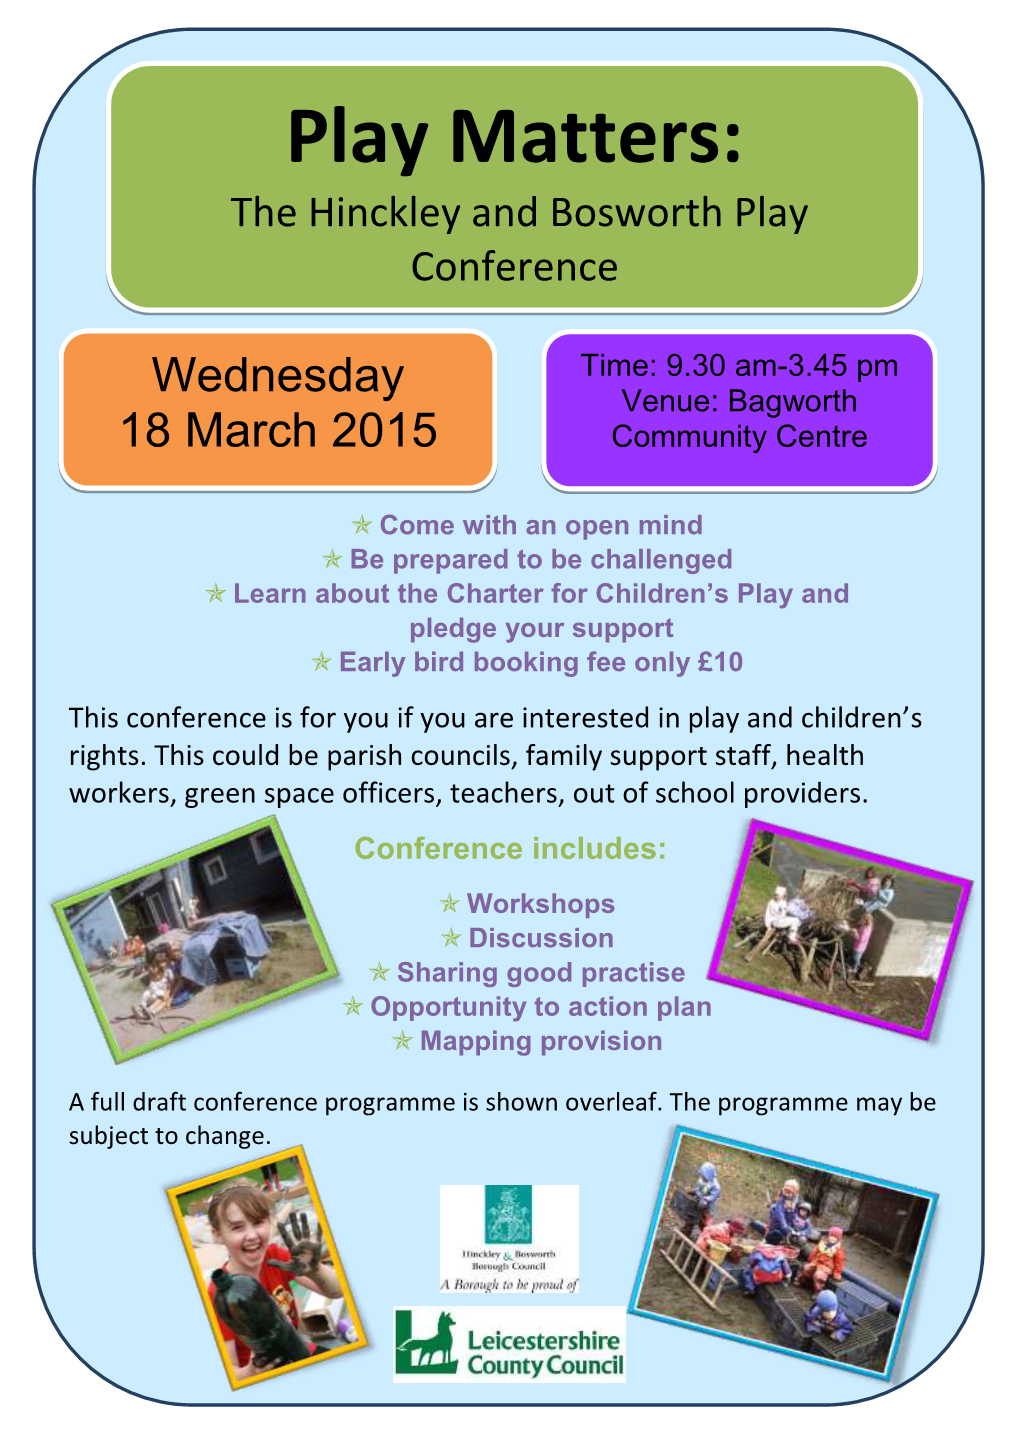 Hinckley and Bosworth Play Conference Wednesday 18 March 2015